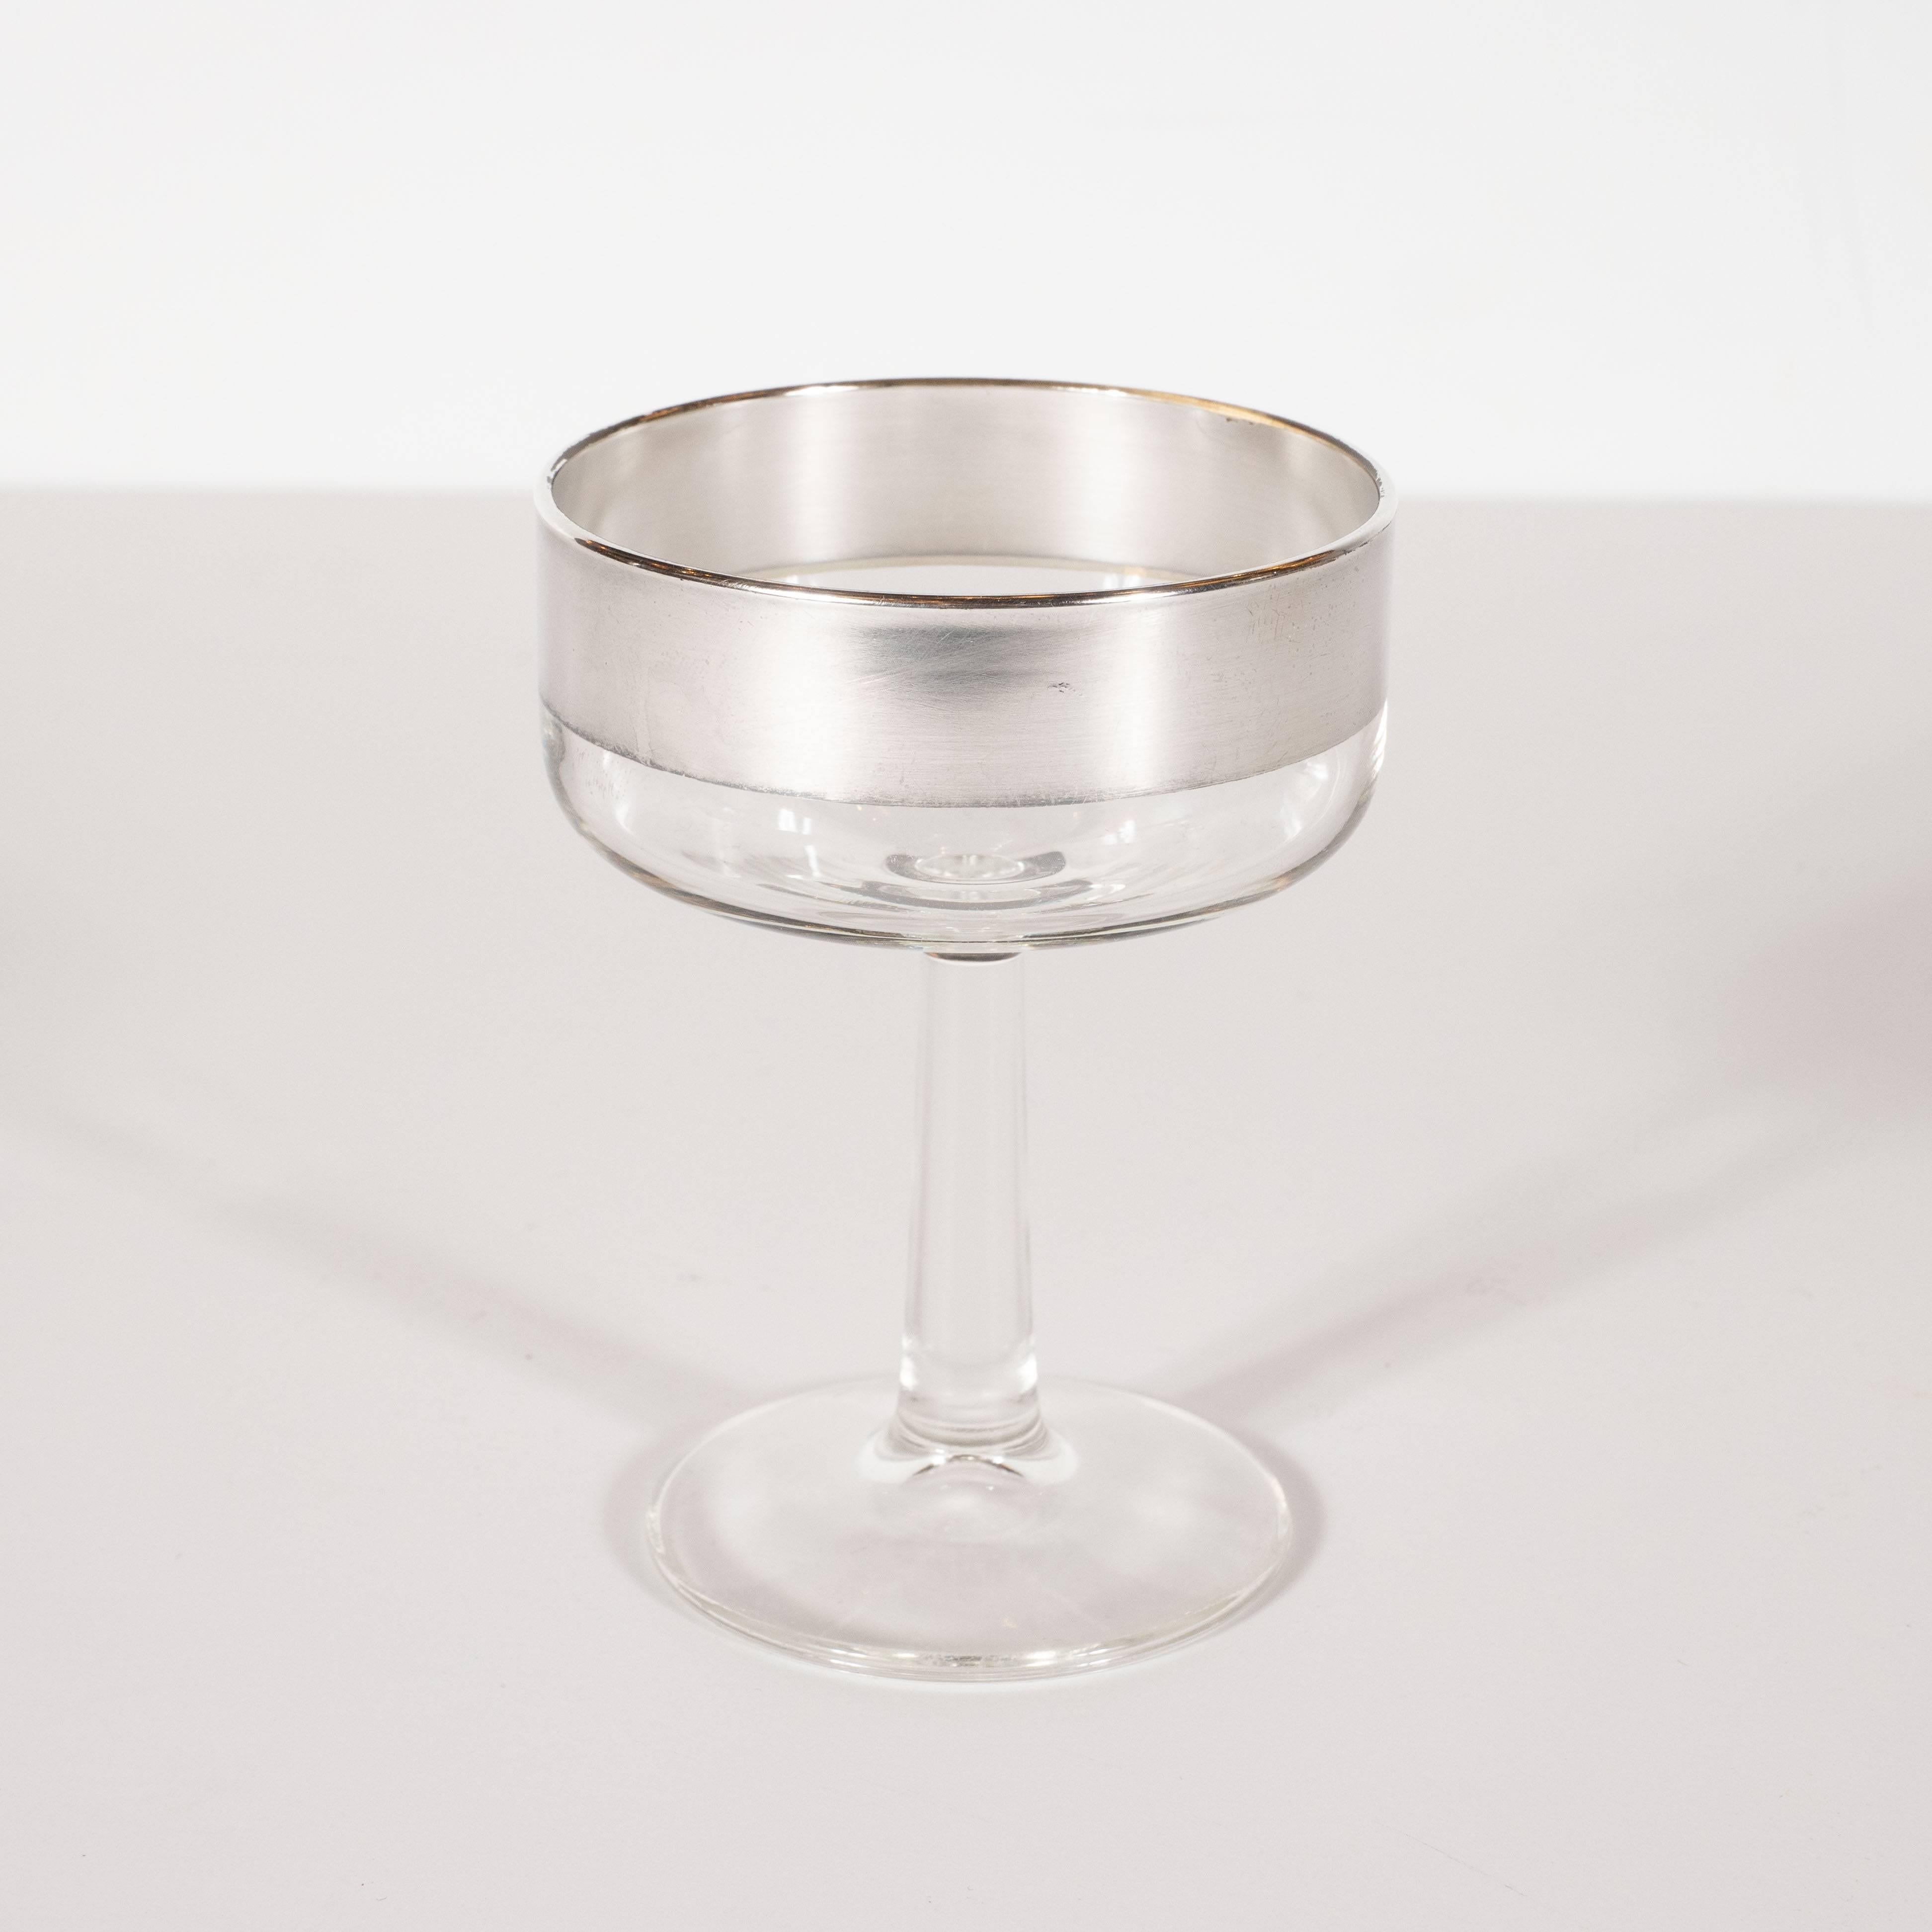 This refined set of four champagne coupes were designed in California by the esteemed Mid-Century Modern designer Dorothy Thorpe, circa 1950. Composed of simple cylindrical forms, they offer band detailing in sterling silver overlay at the top of